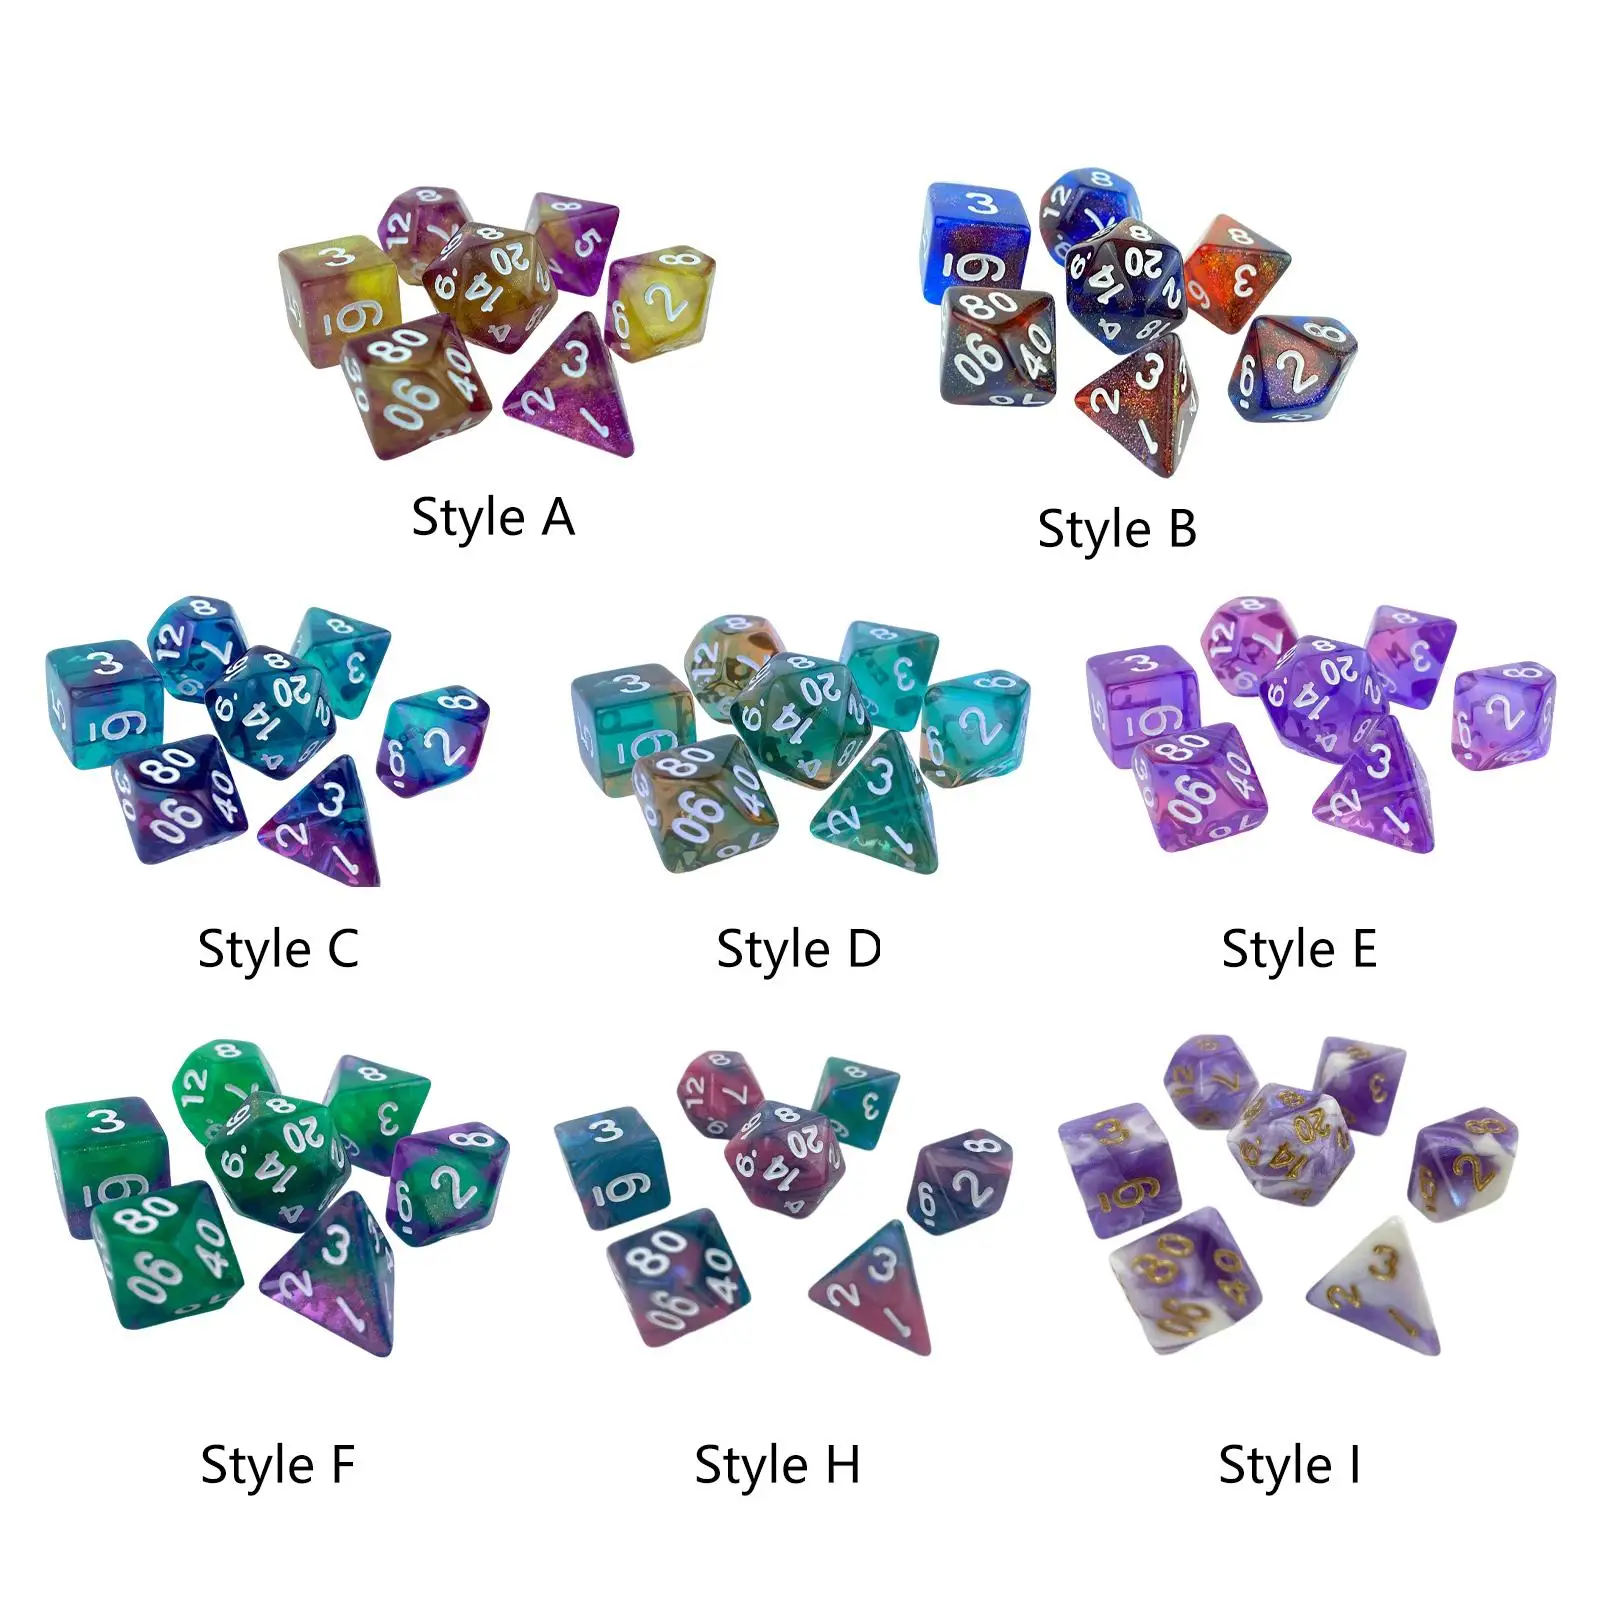 7 Pieces Game Dices Assorted Luminary Double Colors for Parties Table Games